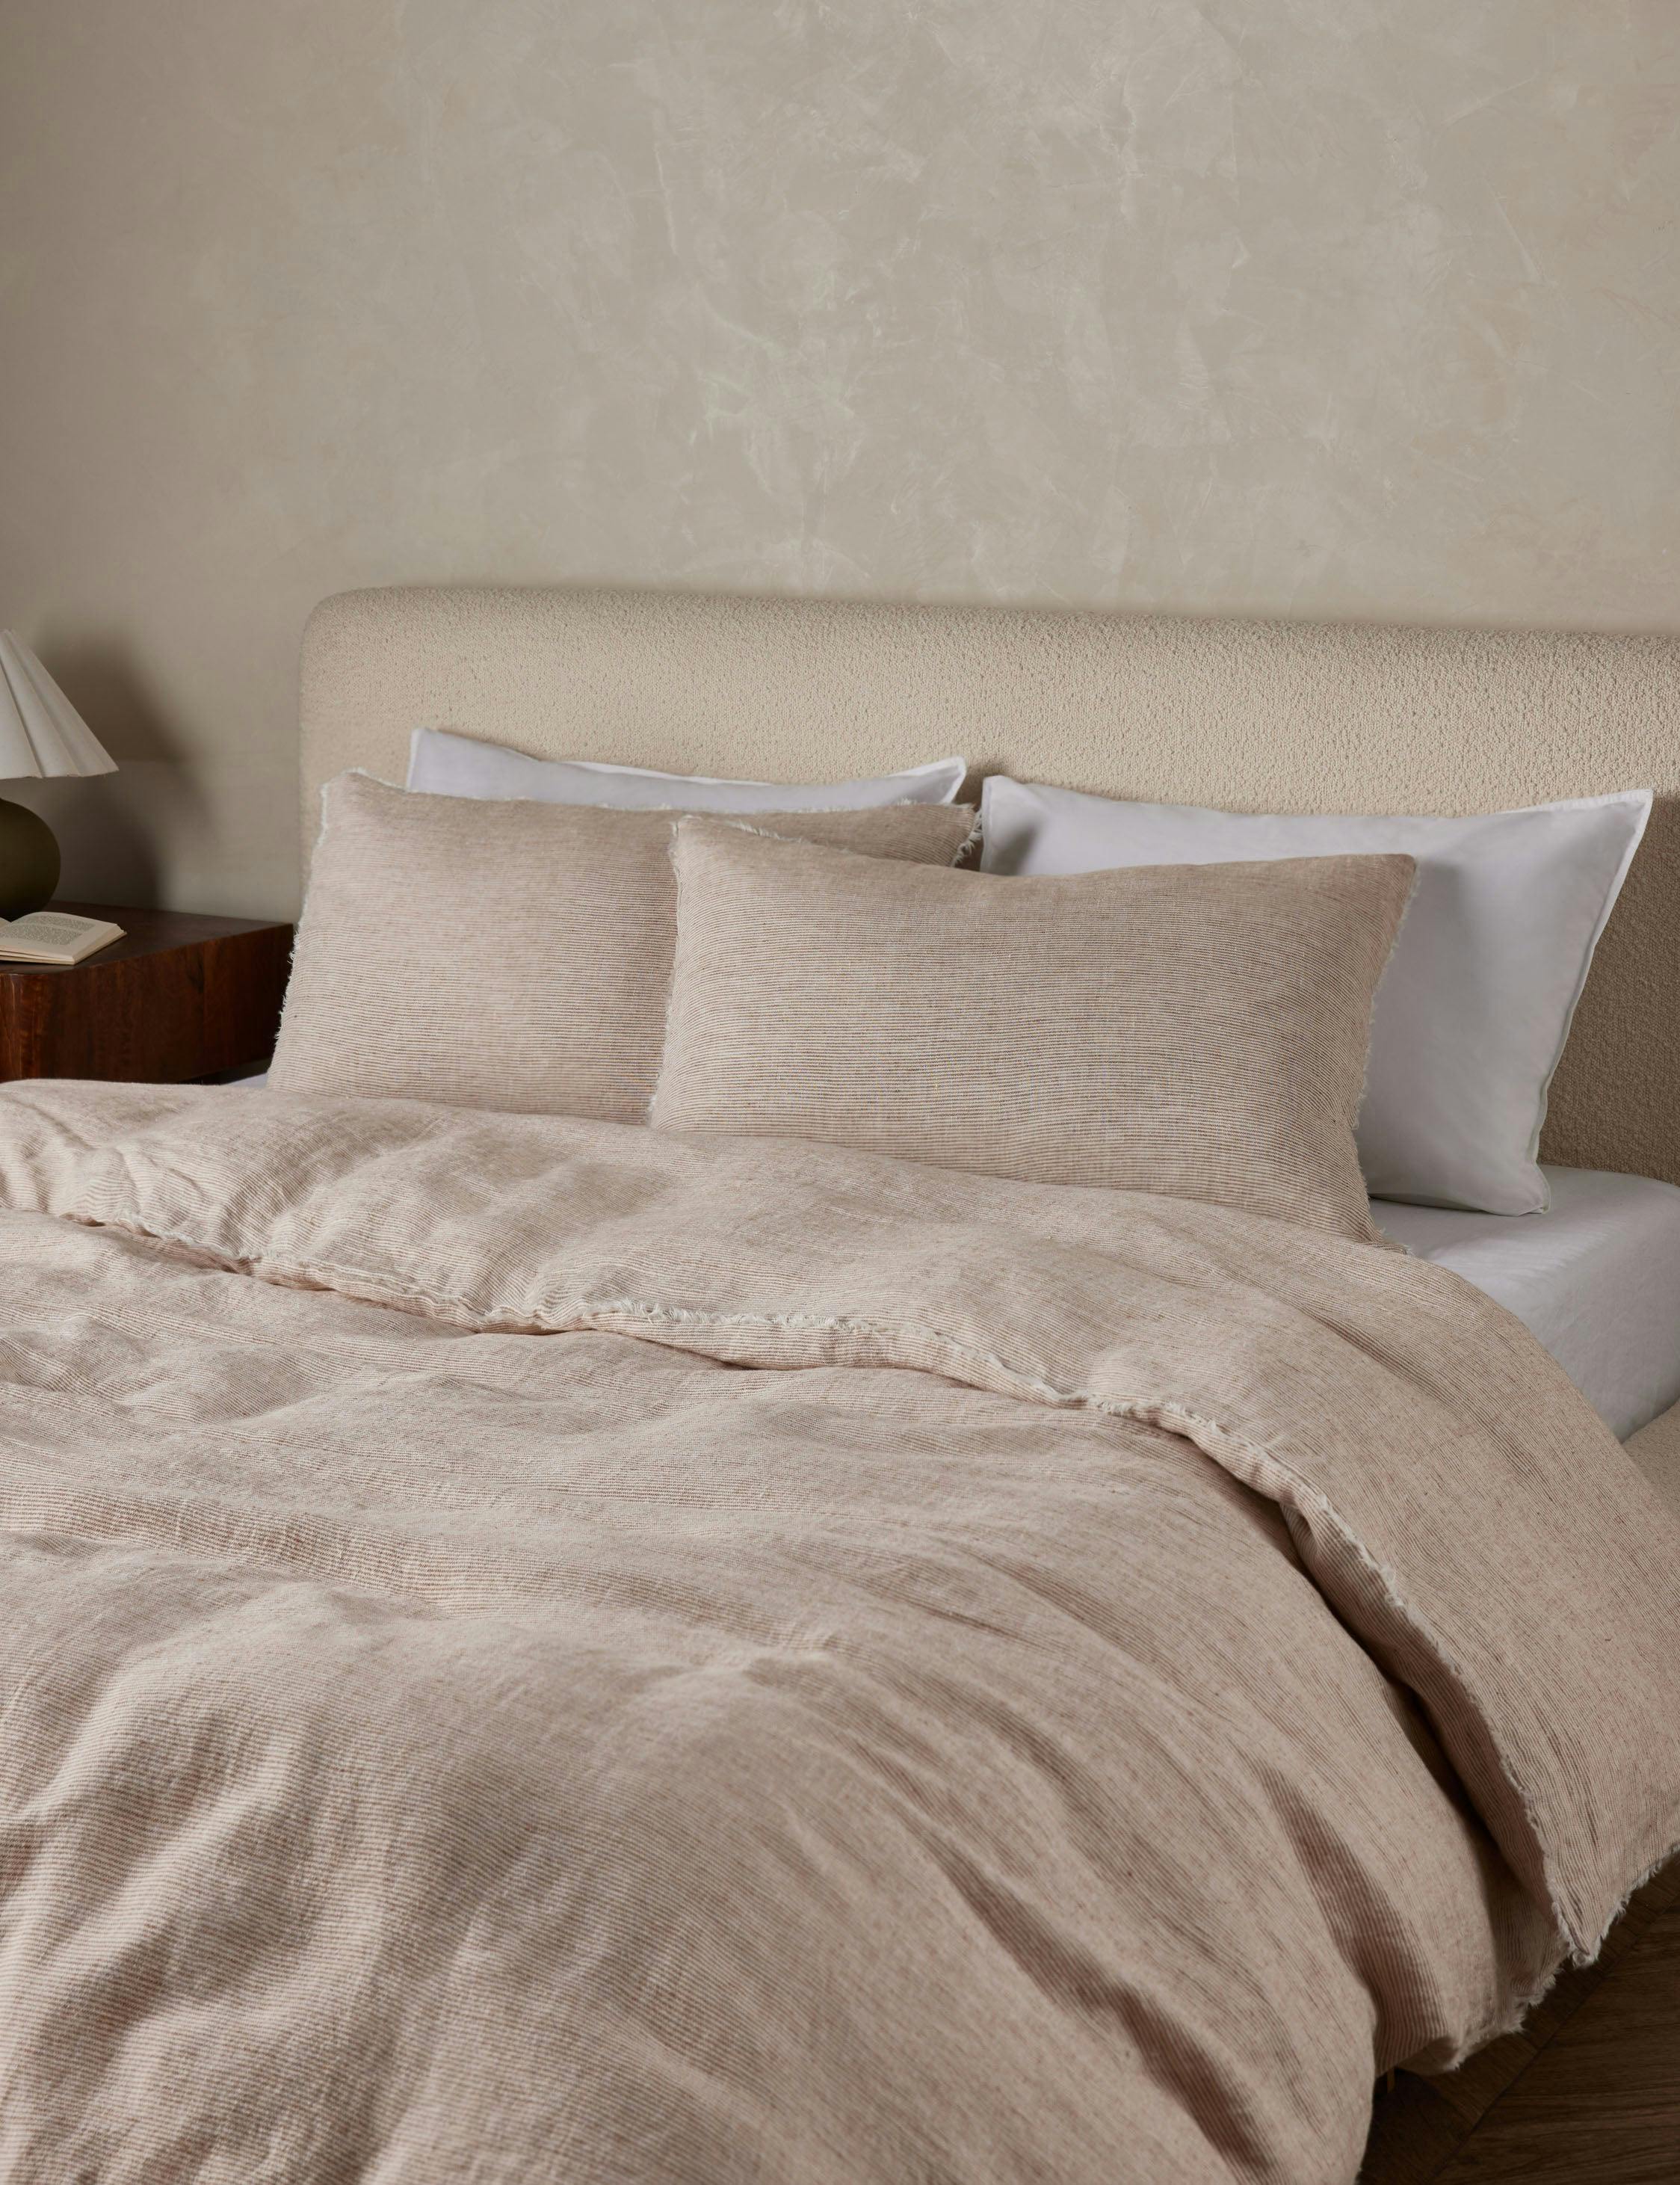 Terra Cotta Linen Standard Sham with Frayed Edges and Heathered Texture